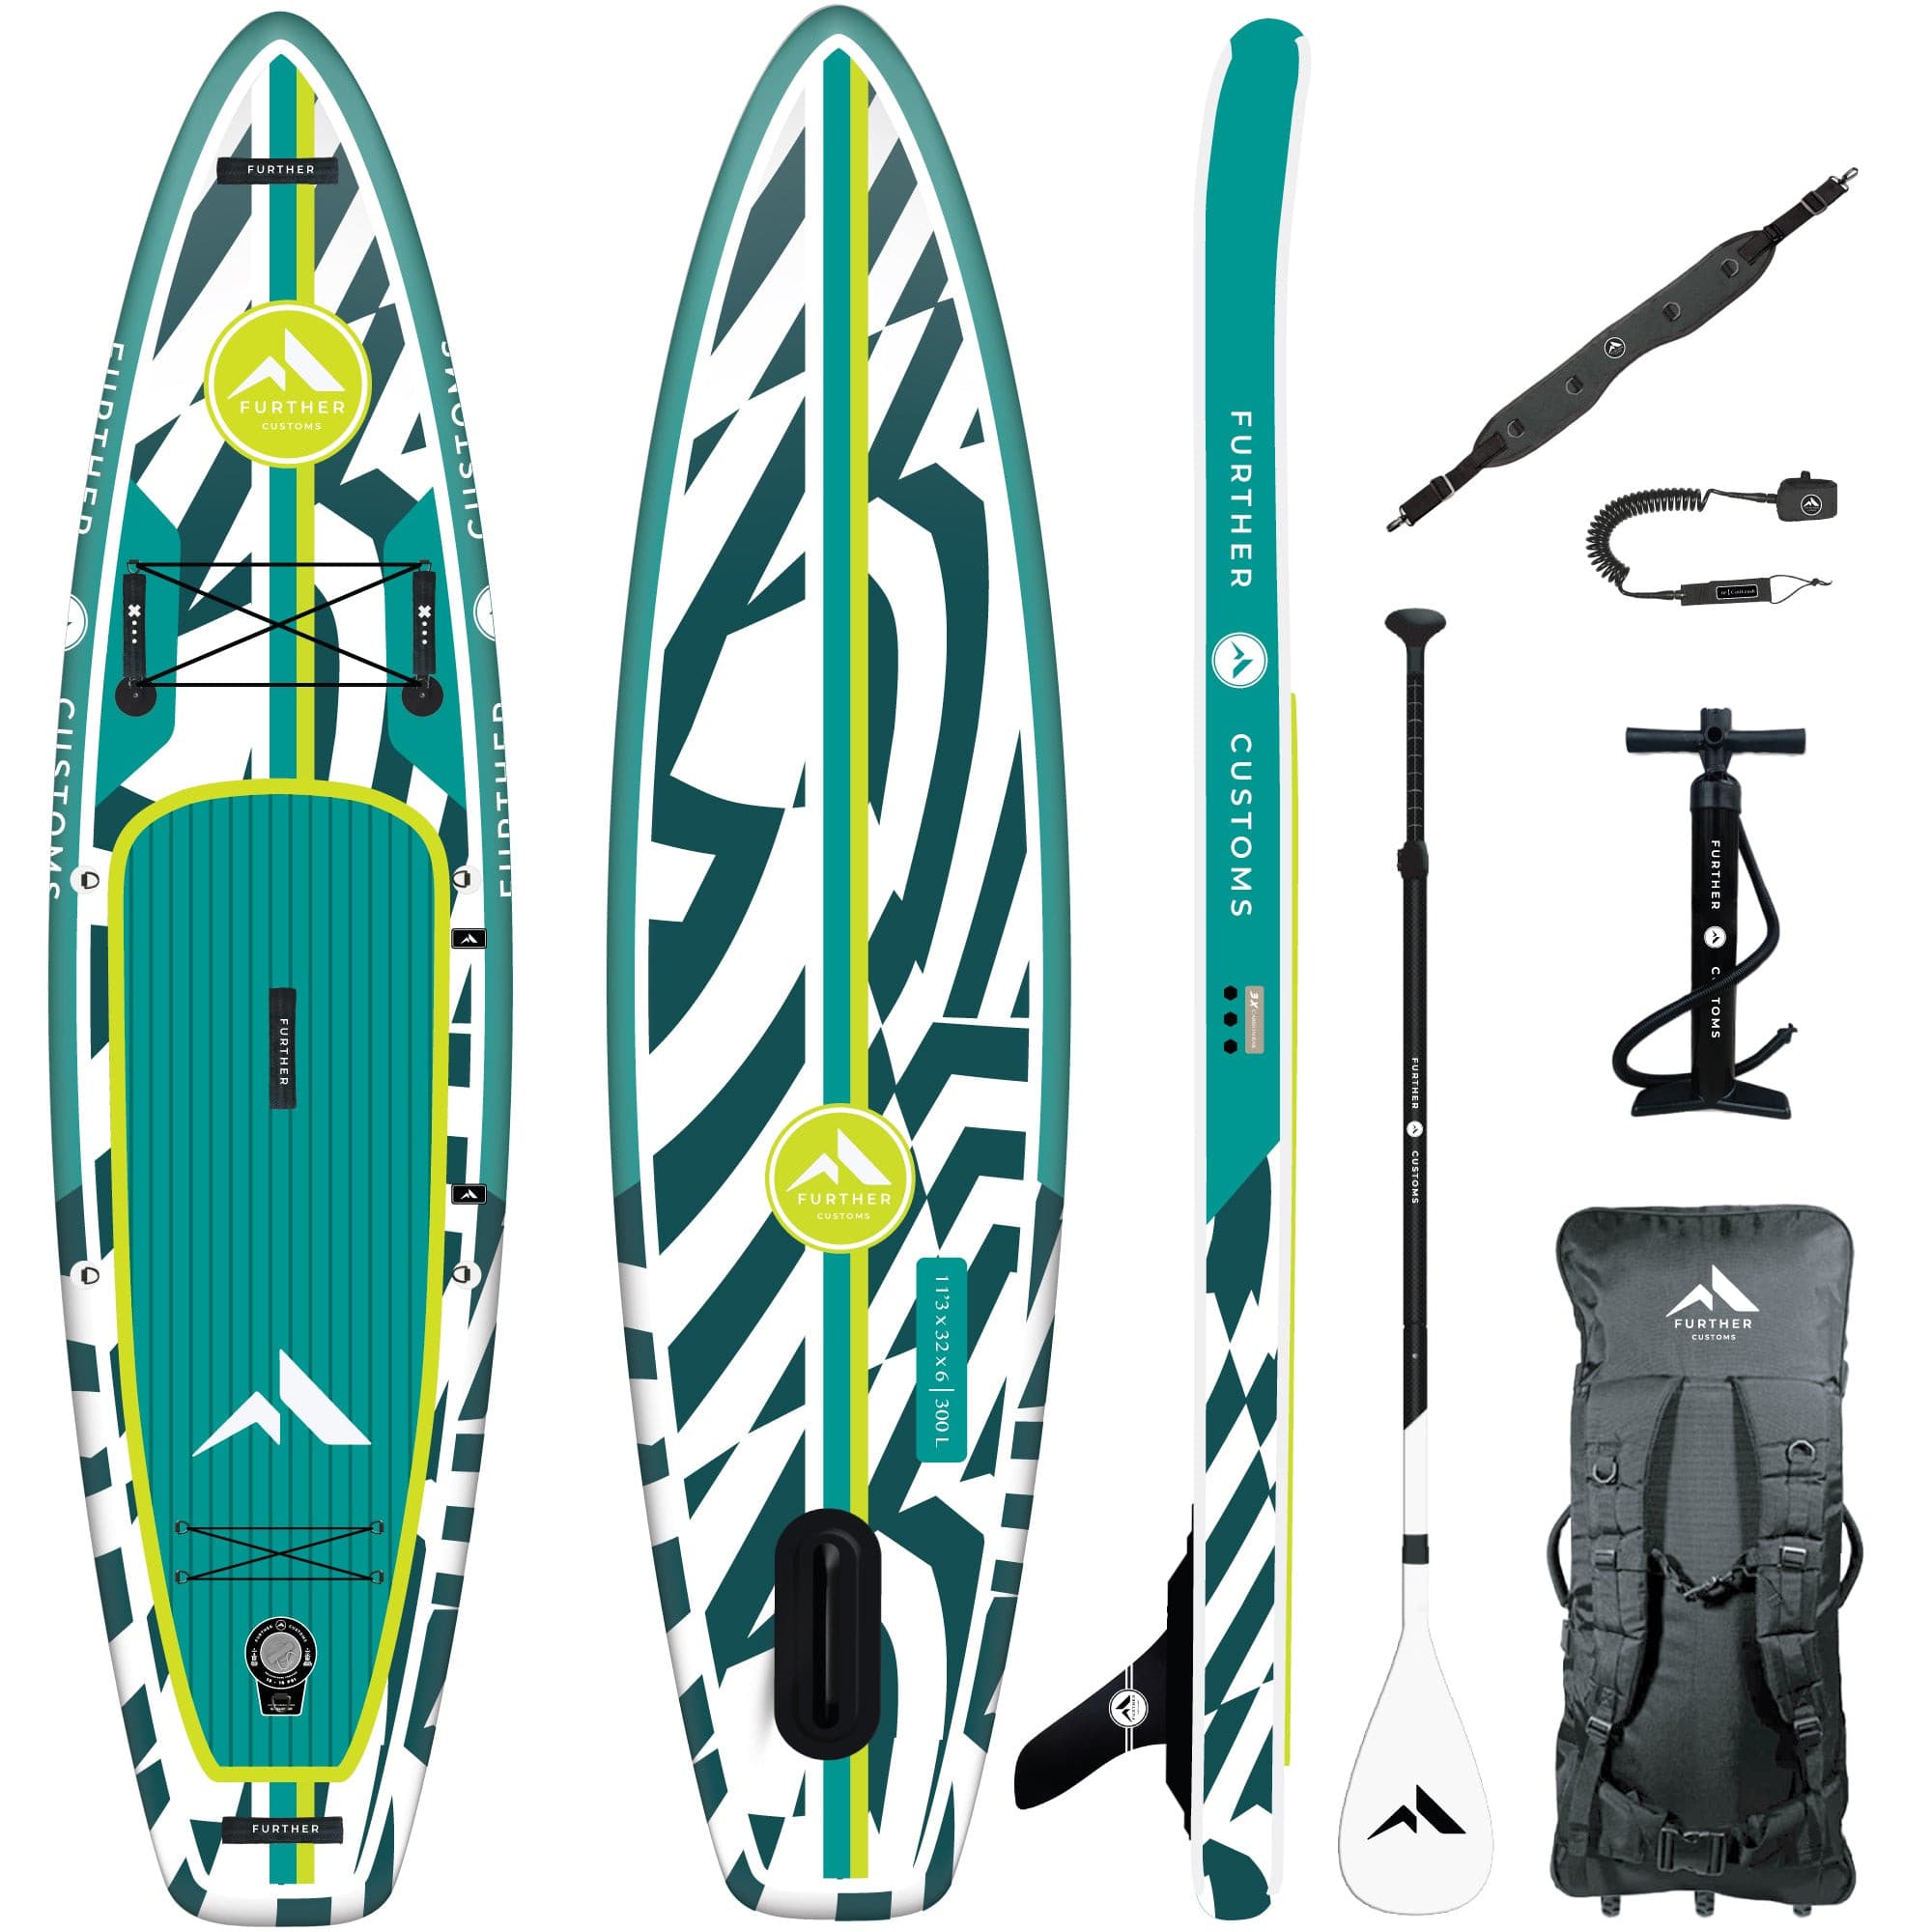 Further Customs - 11\'3 Podium Turquoise Inflatable Paddleboard Kit